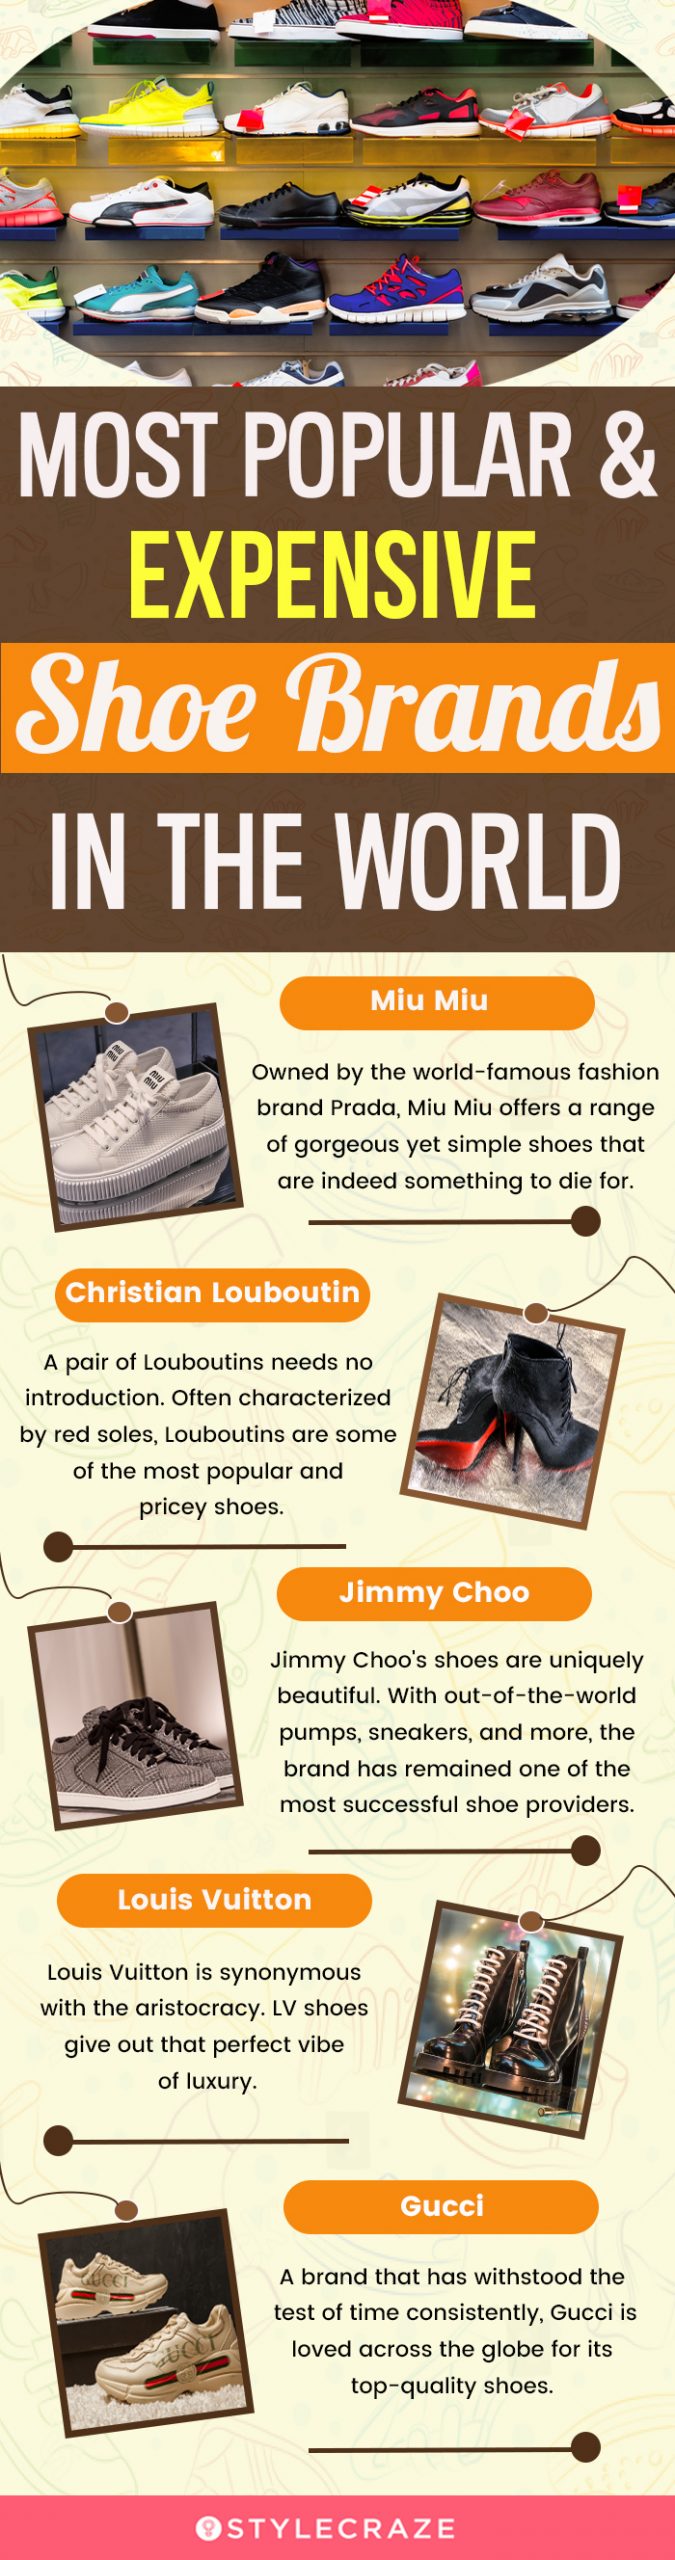 Top 10 Most Popular Shoe Brands for Women in the World